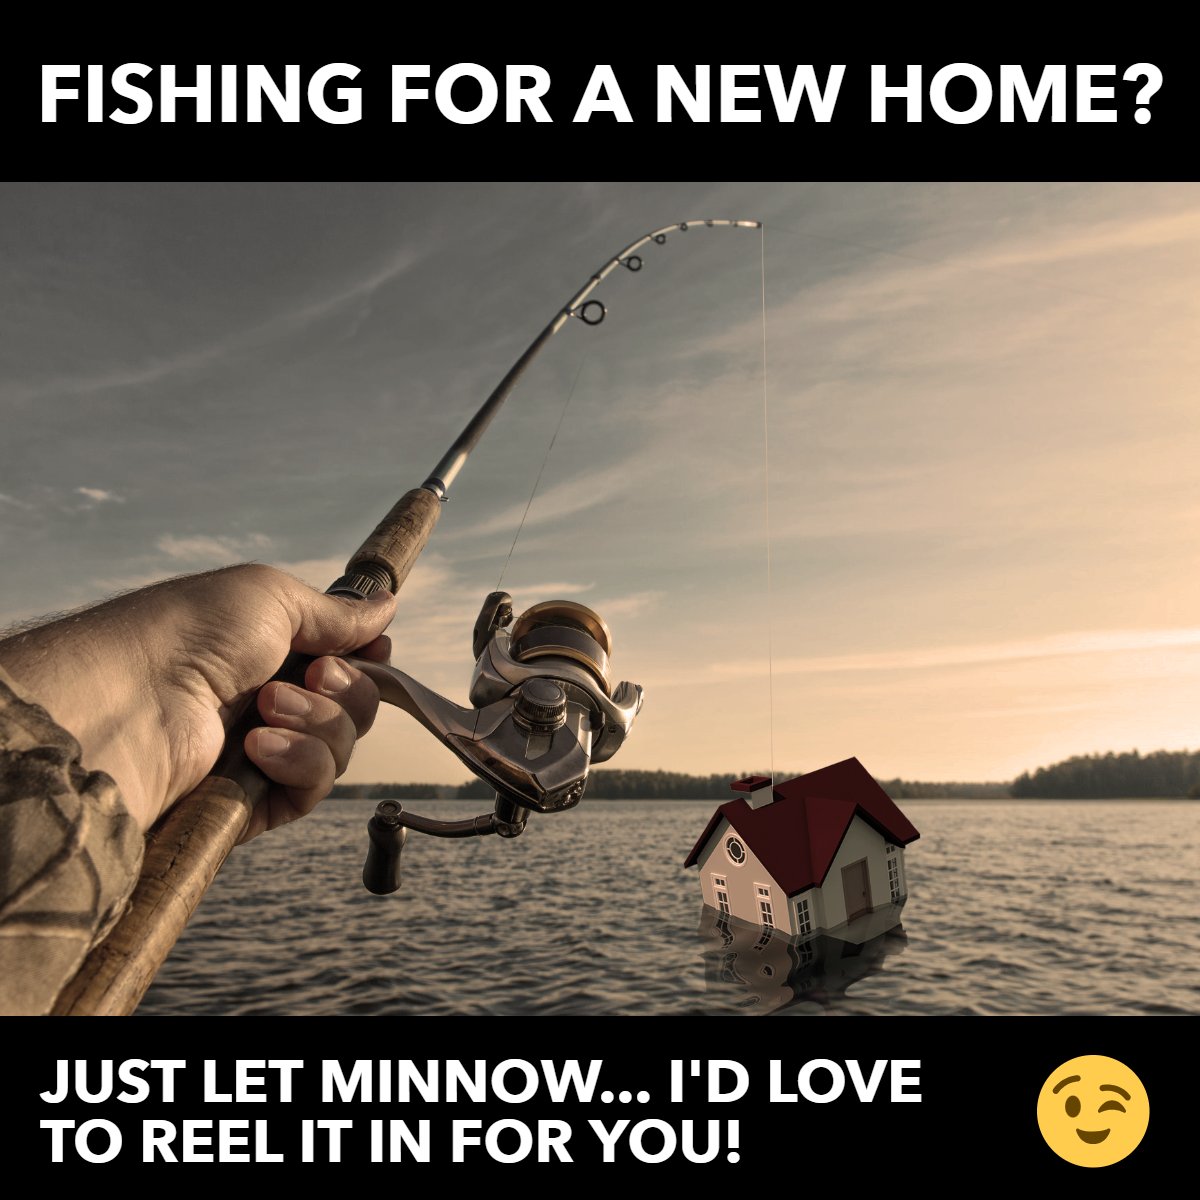 Searching for a new home can feel like fishing 🎣 

Remember, the perfect catch is waiting for you

It's all part of the adventure!

#HouseHunting #RealEstateHumor
 #HomeForSale #SimiValleyHOmes #ThousandOaksHOmesforSale #MoorparkHomesForSale